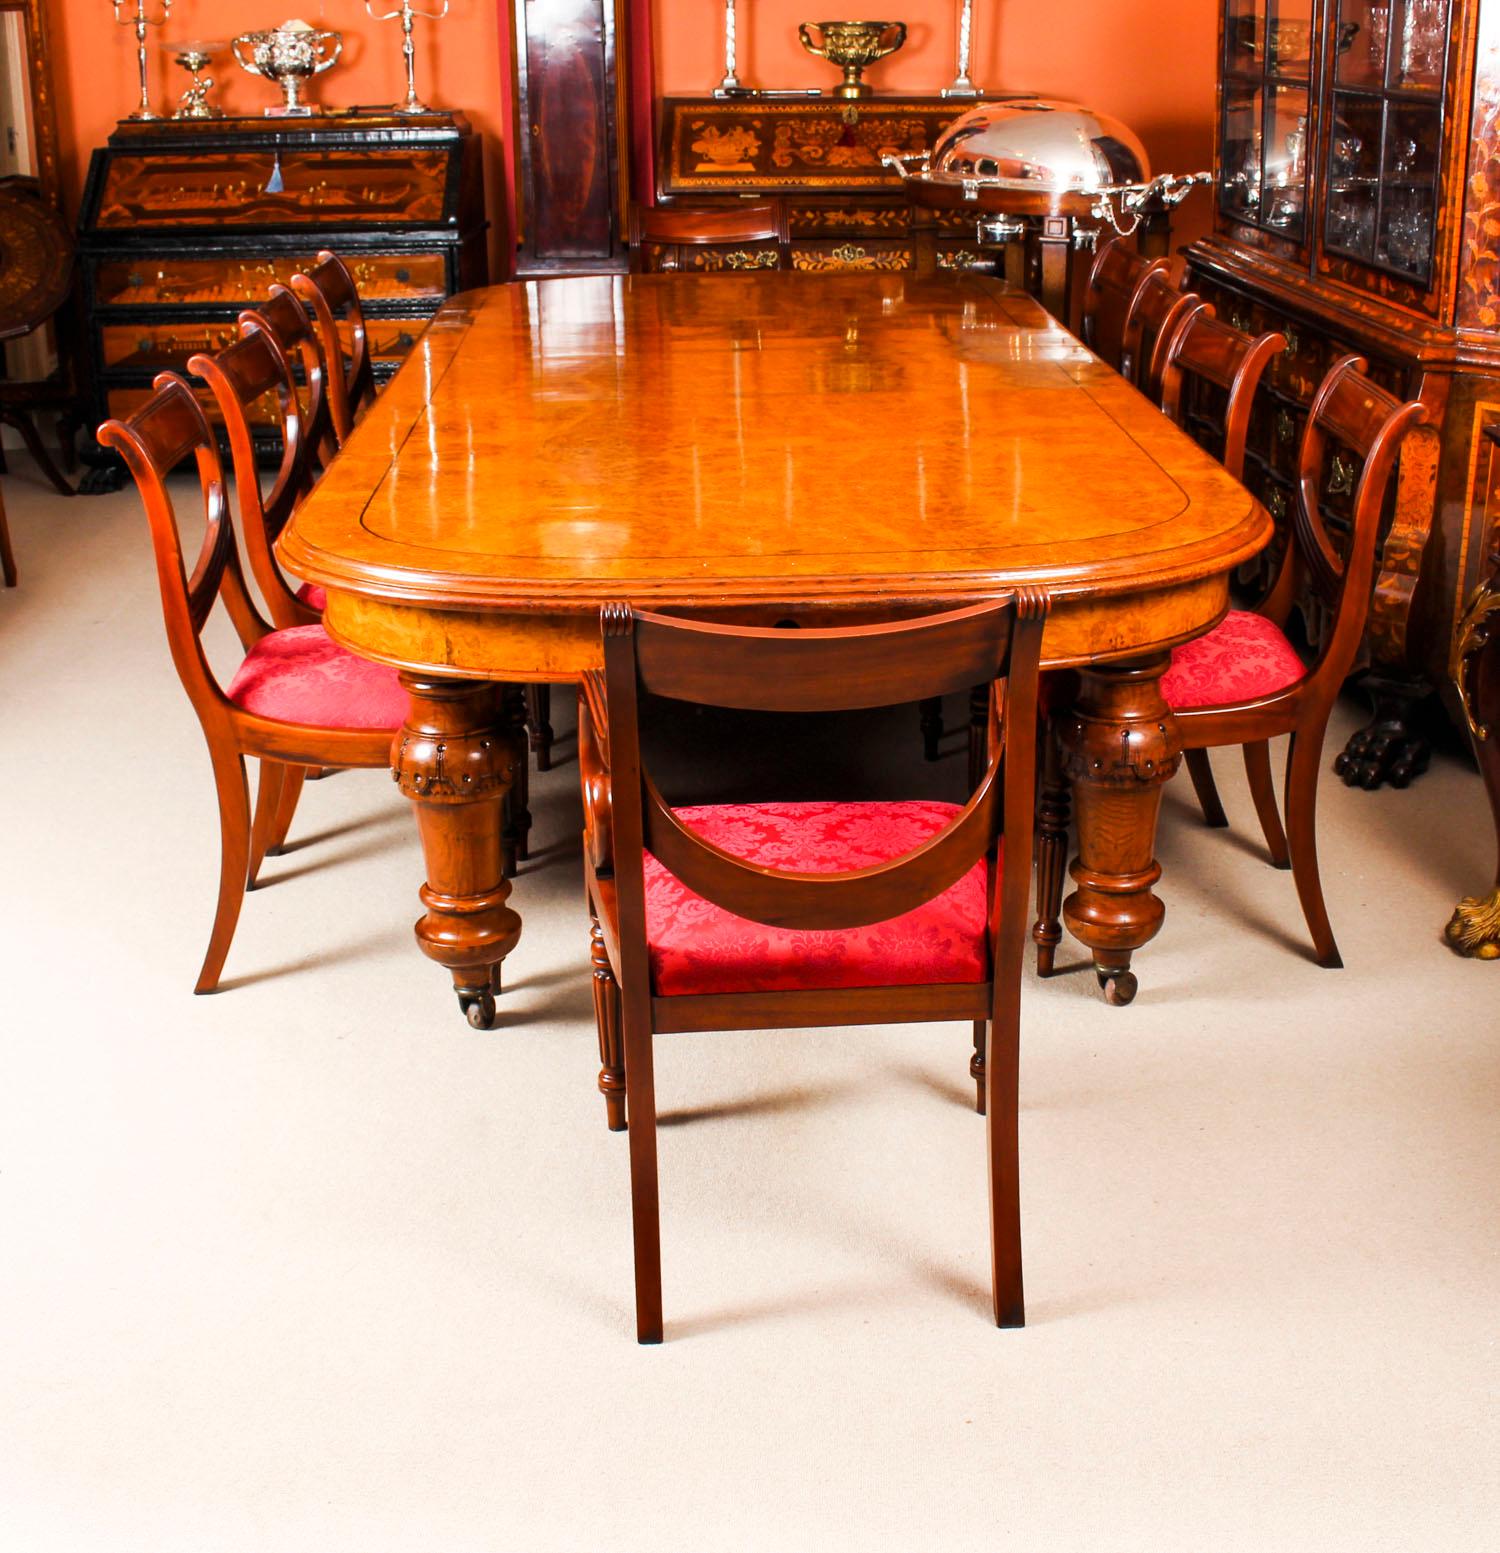 There is no mistaking the style and sophisticated design of this exquisite dining set comprising a rare English antique Victorian pollard oak extending dining table, circa 1850 in date and a set of ten vintage dining chairs.
The styles that